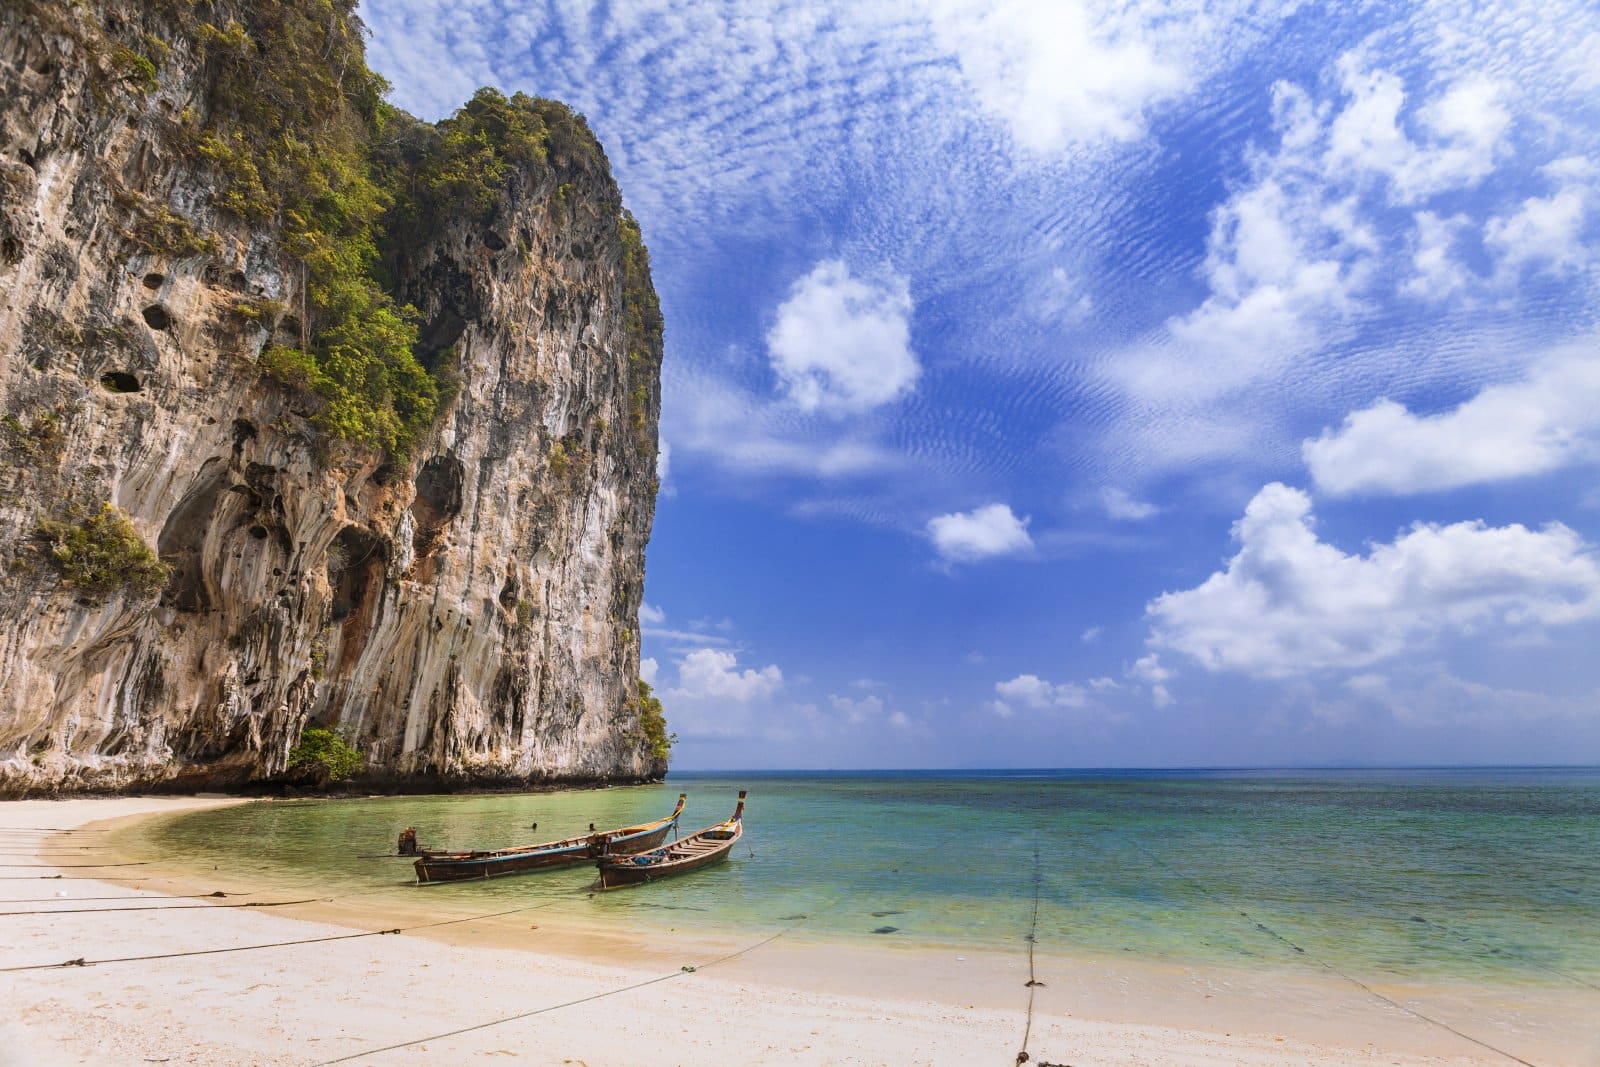 <p class="wp-caption-text">Image Credit: Shutterstock / non15</p>  <p><span>Koh Lao Liang, part of the Petra Archipelago, is a hidden gem that offers an intimate connection with nature away from the crowds. This island is renowned for its towering limestone cliffs that provide some of Thailand’s best rock climbing experiences, set against the backdrop of the Andaman Sea’s turquoise waters. The beaches here are pristine, with soft white sand and clear waters ideal for snorkeling and kayaking, allowing visitors to explore the rich marine life and coral gardens. The island’s approach to tourism is highly sustainable, with eco-tents and minimal development ensuring a low environmental footprint. Koh Lao Liang’s commitment to preserving its natural beauty while offering adventure and relaxation makes it a must-visit for those looking to explore Thailand’s natural wonders in a responsible and sustainable manner.</span></p>